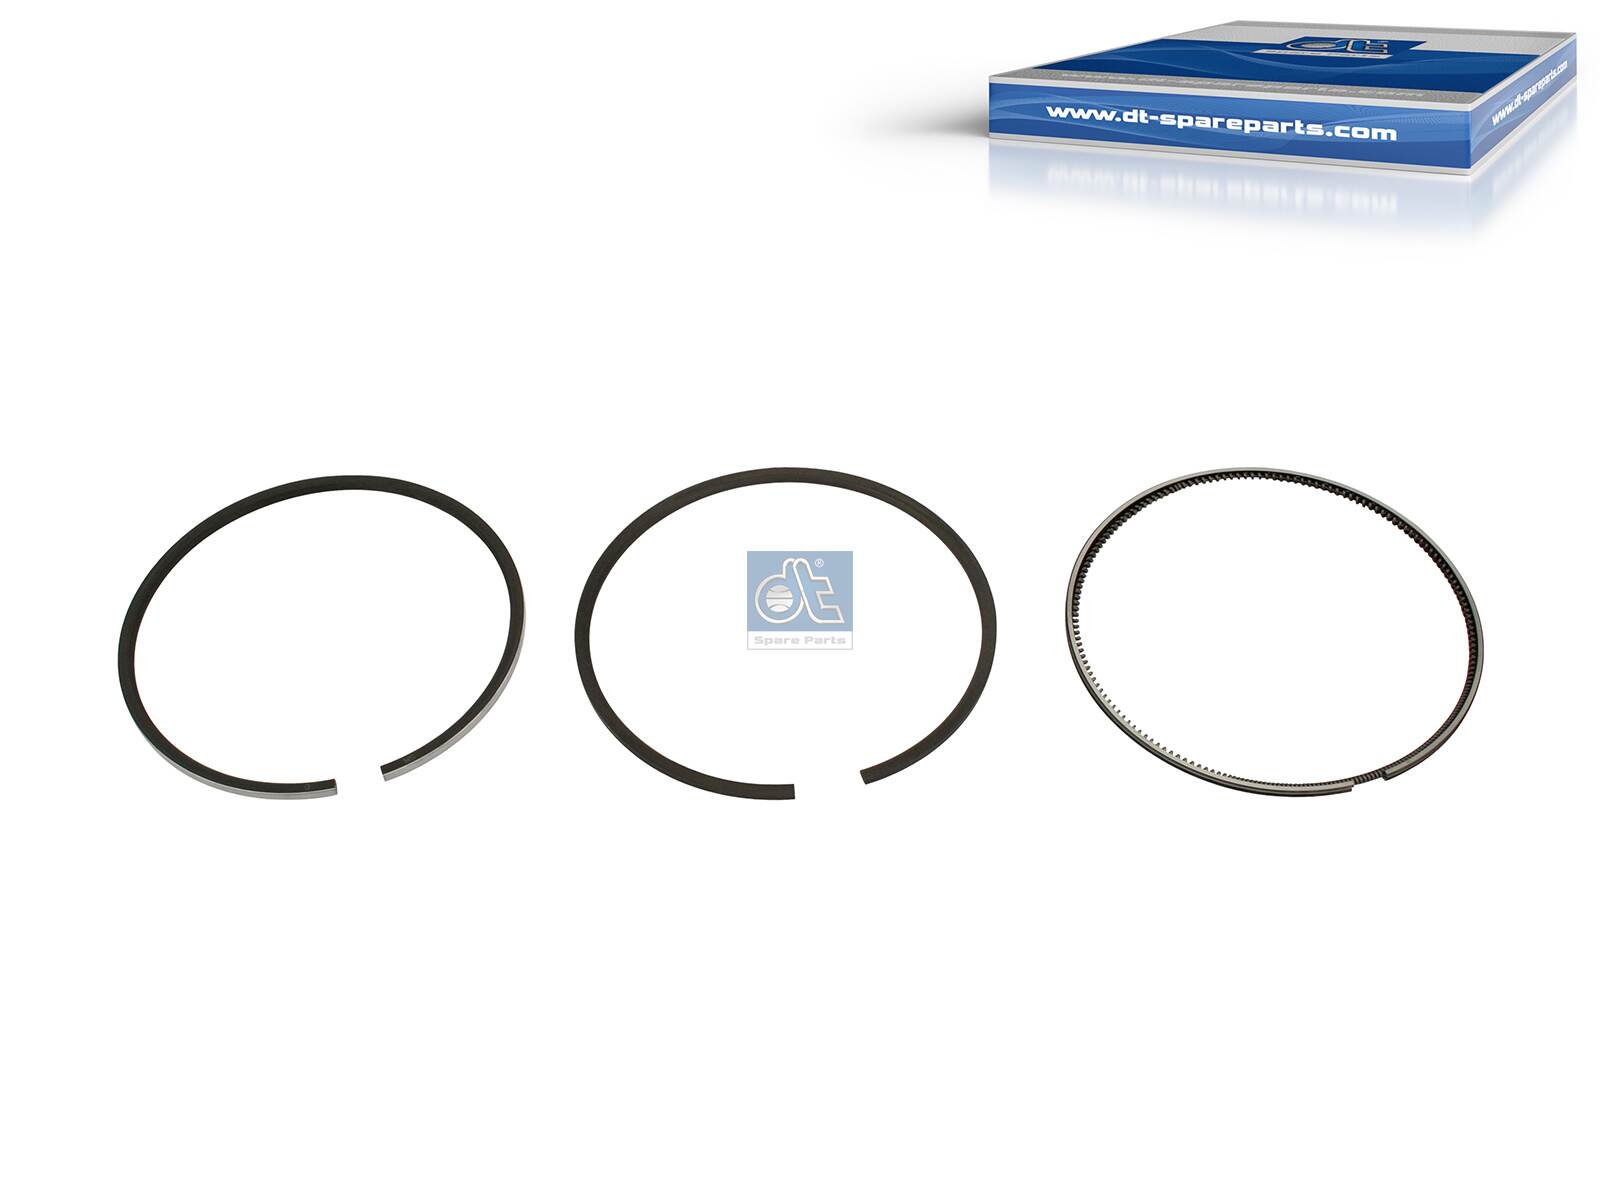 2.90125, Piston Ring Kit, DT Spare Parts, 21253763, 7420747511, 20747511, 7421253763, 038.247, 0843440000, 103343, 4047755711818, 800075710000, 038247, 03873N0, 08-434400-00, 4047755794736, A71800, PRK511, PRK-511